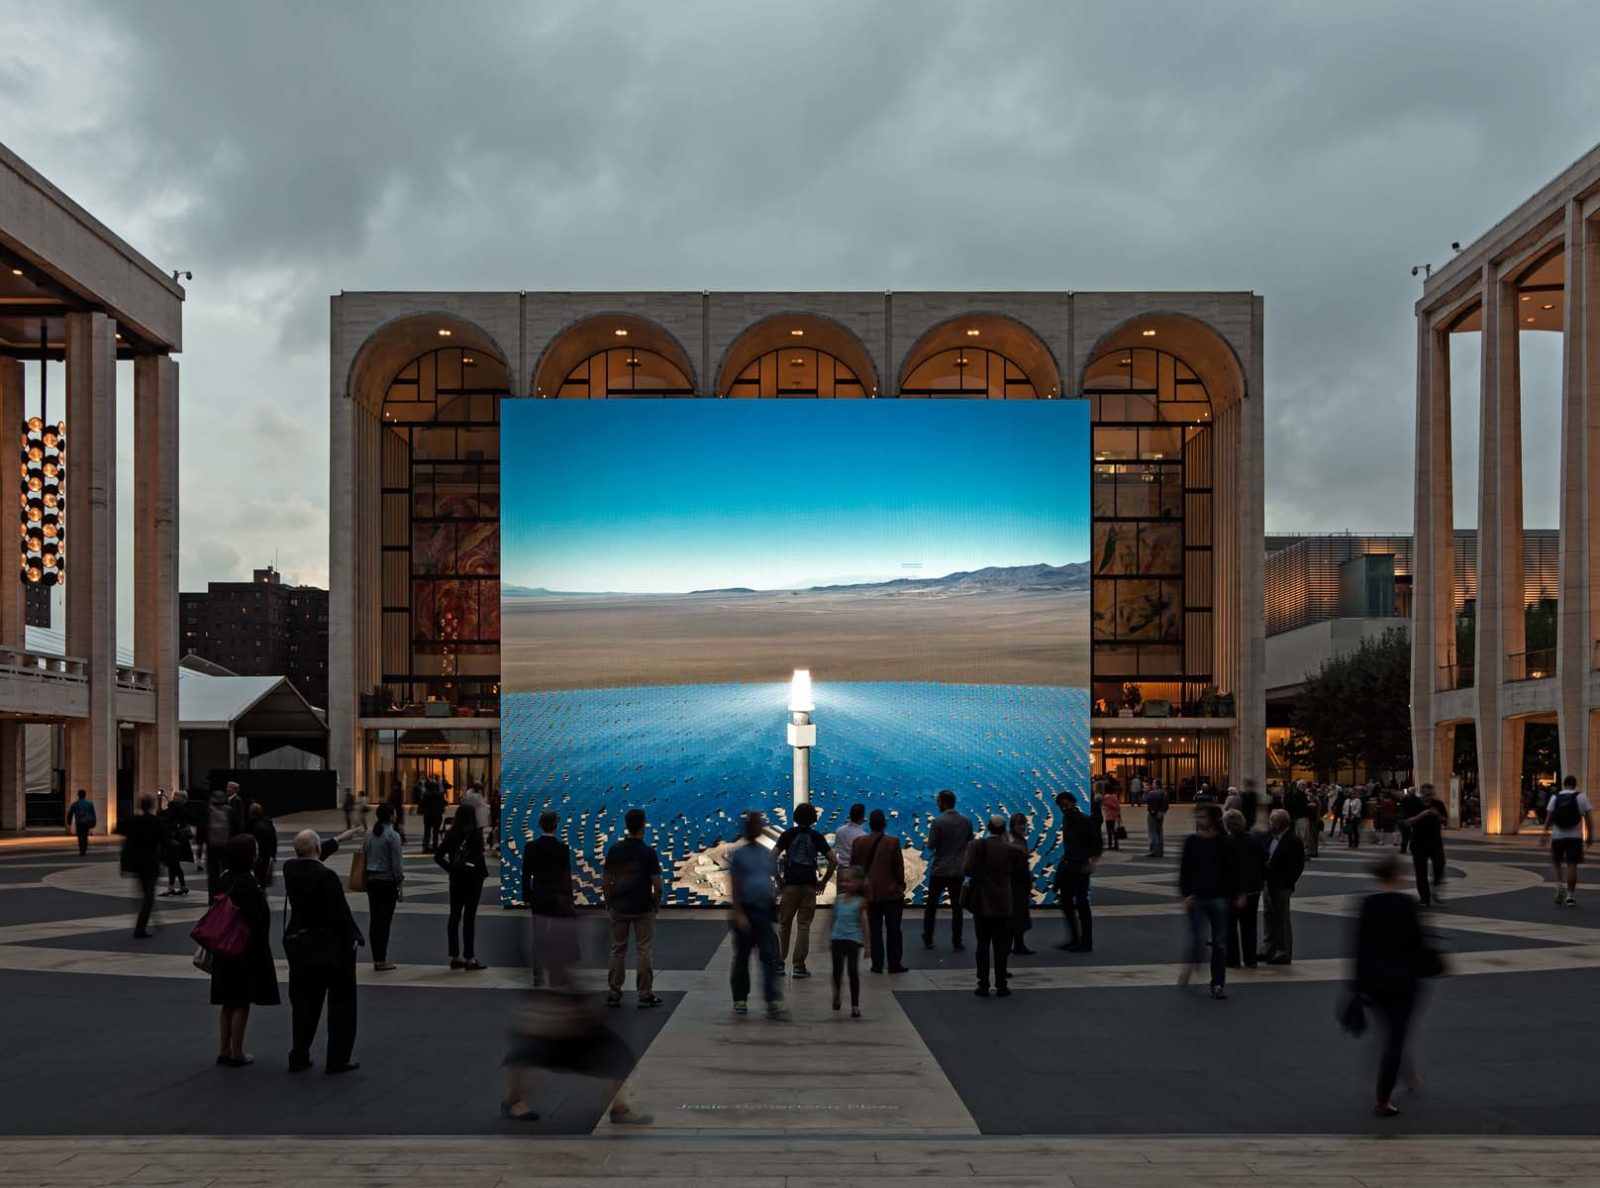 A large-scale digital art installation installed in a public plaza with a crowd of people in front.